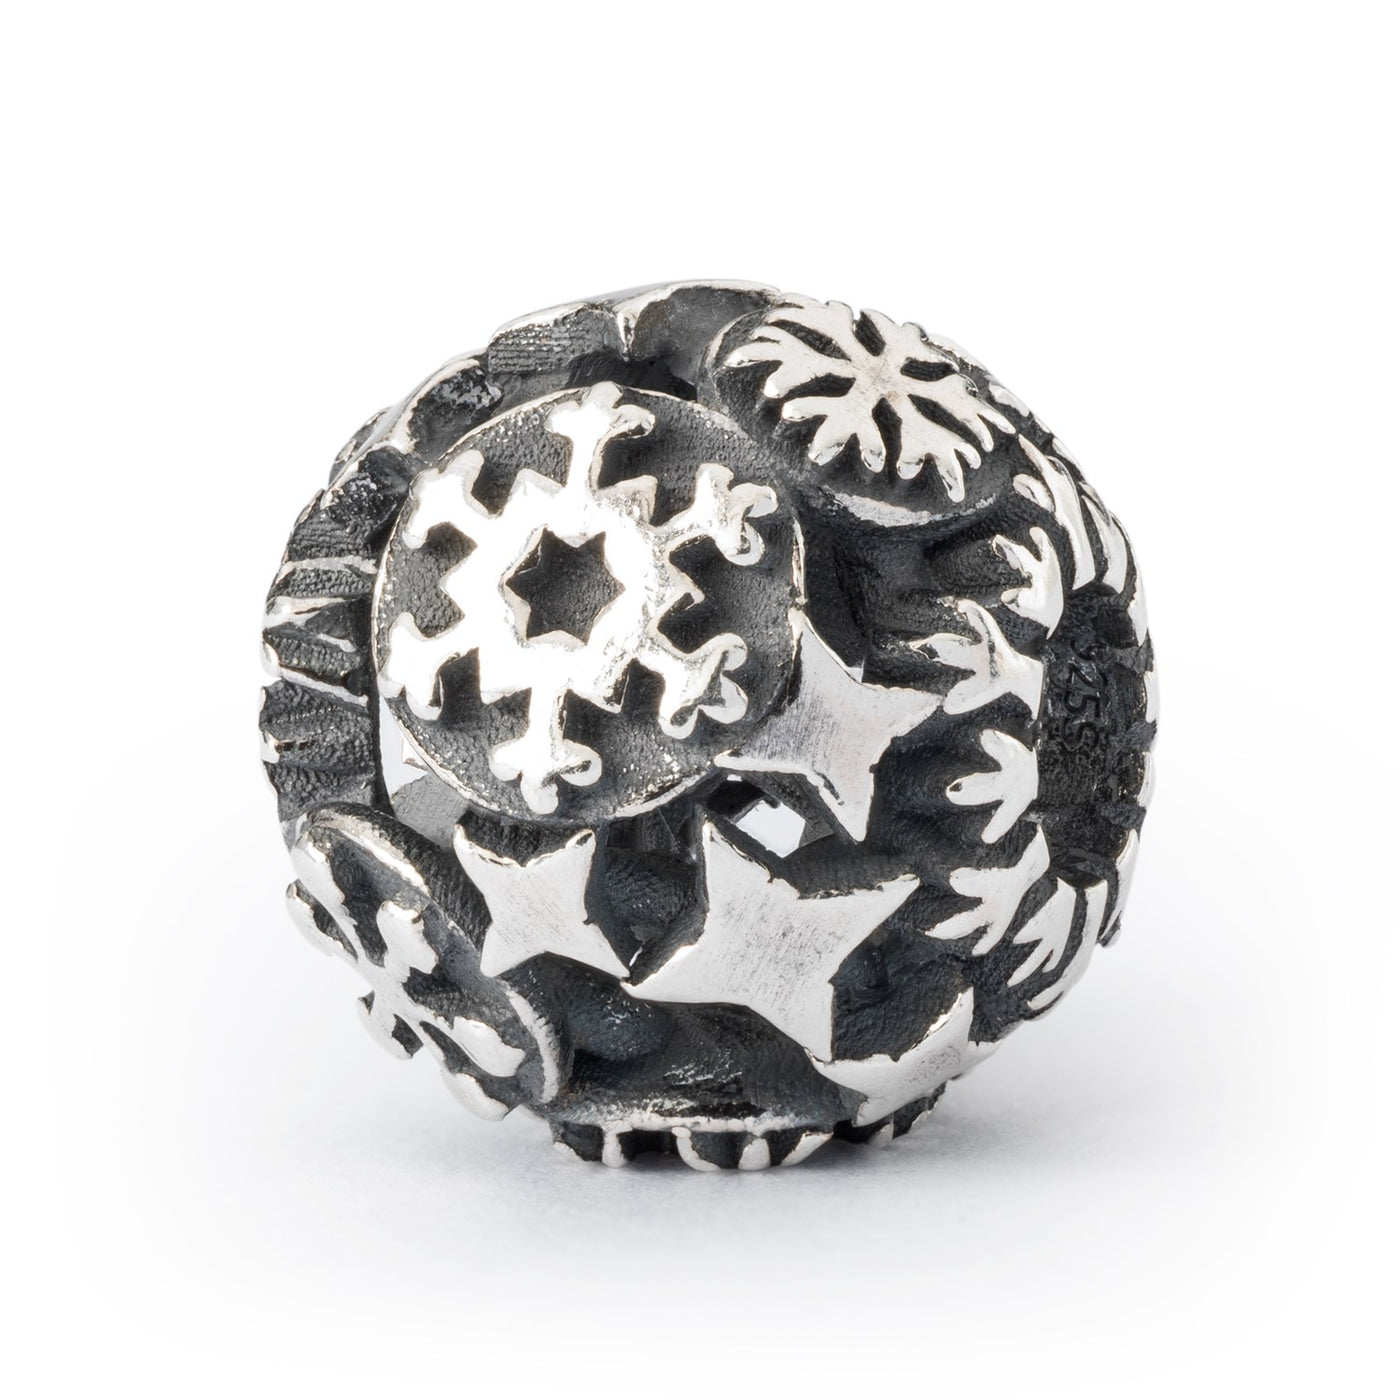 Silver 'Snow Kisses' bead featuring intricate snowflake designs, symbolizing the beauty and magic of winter.